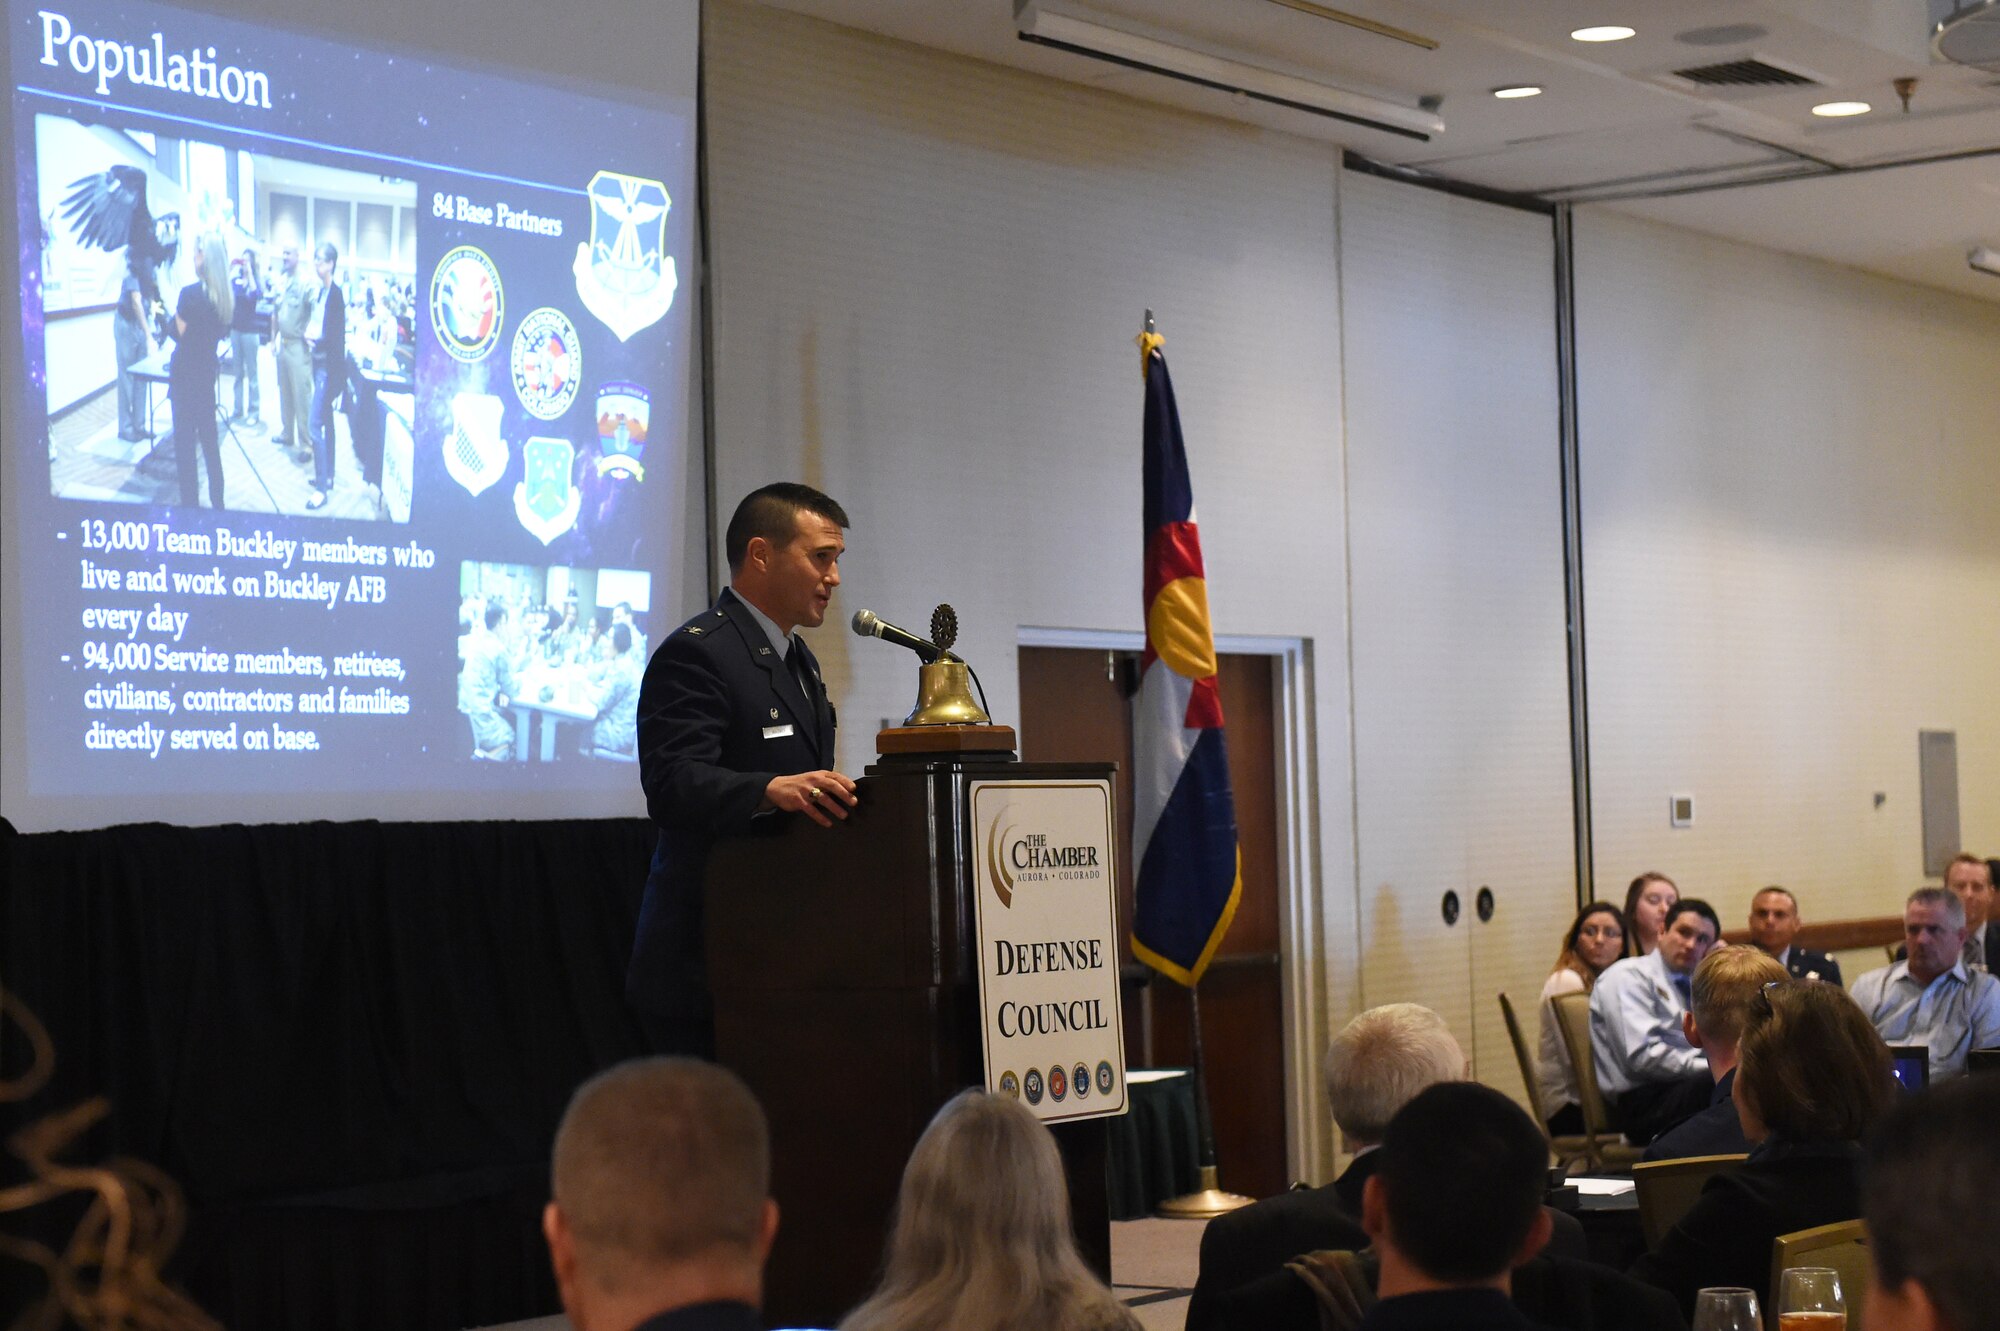 Col. John Wagner, 460th Space Wing commander, speaks to Aurora community leaders at the State of the Base address Jan. 21, 2015, at the DoubleTree by Hilton in Aurora, Colo. This year’s event included things that had never been done in the past, to include an interactive audience demonstration depicting the complexity of infrared missile detection, as well as a surprise visit from the base’s mascot, Buck Lee. The speech emphasized the base’s affiliation with mission partners, outlined the current and upcoming events for Team Buckley and displayed the base’s economic impact on the community. (U.S. Air Force photo by Airman 1st Class Samantha Saulsbury/Released)